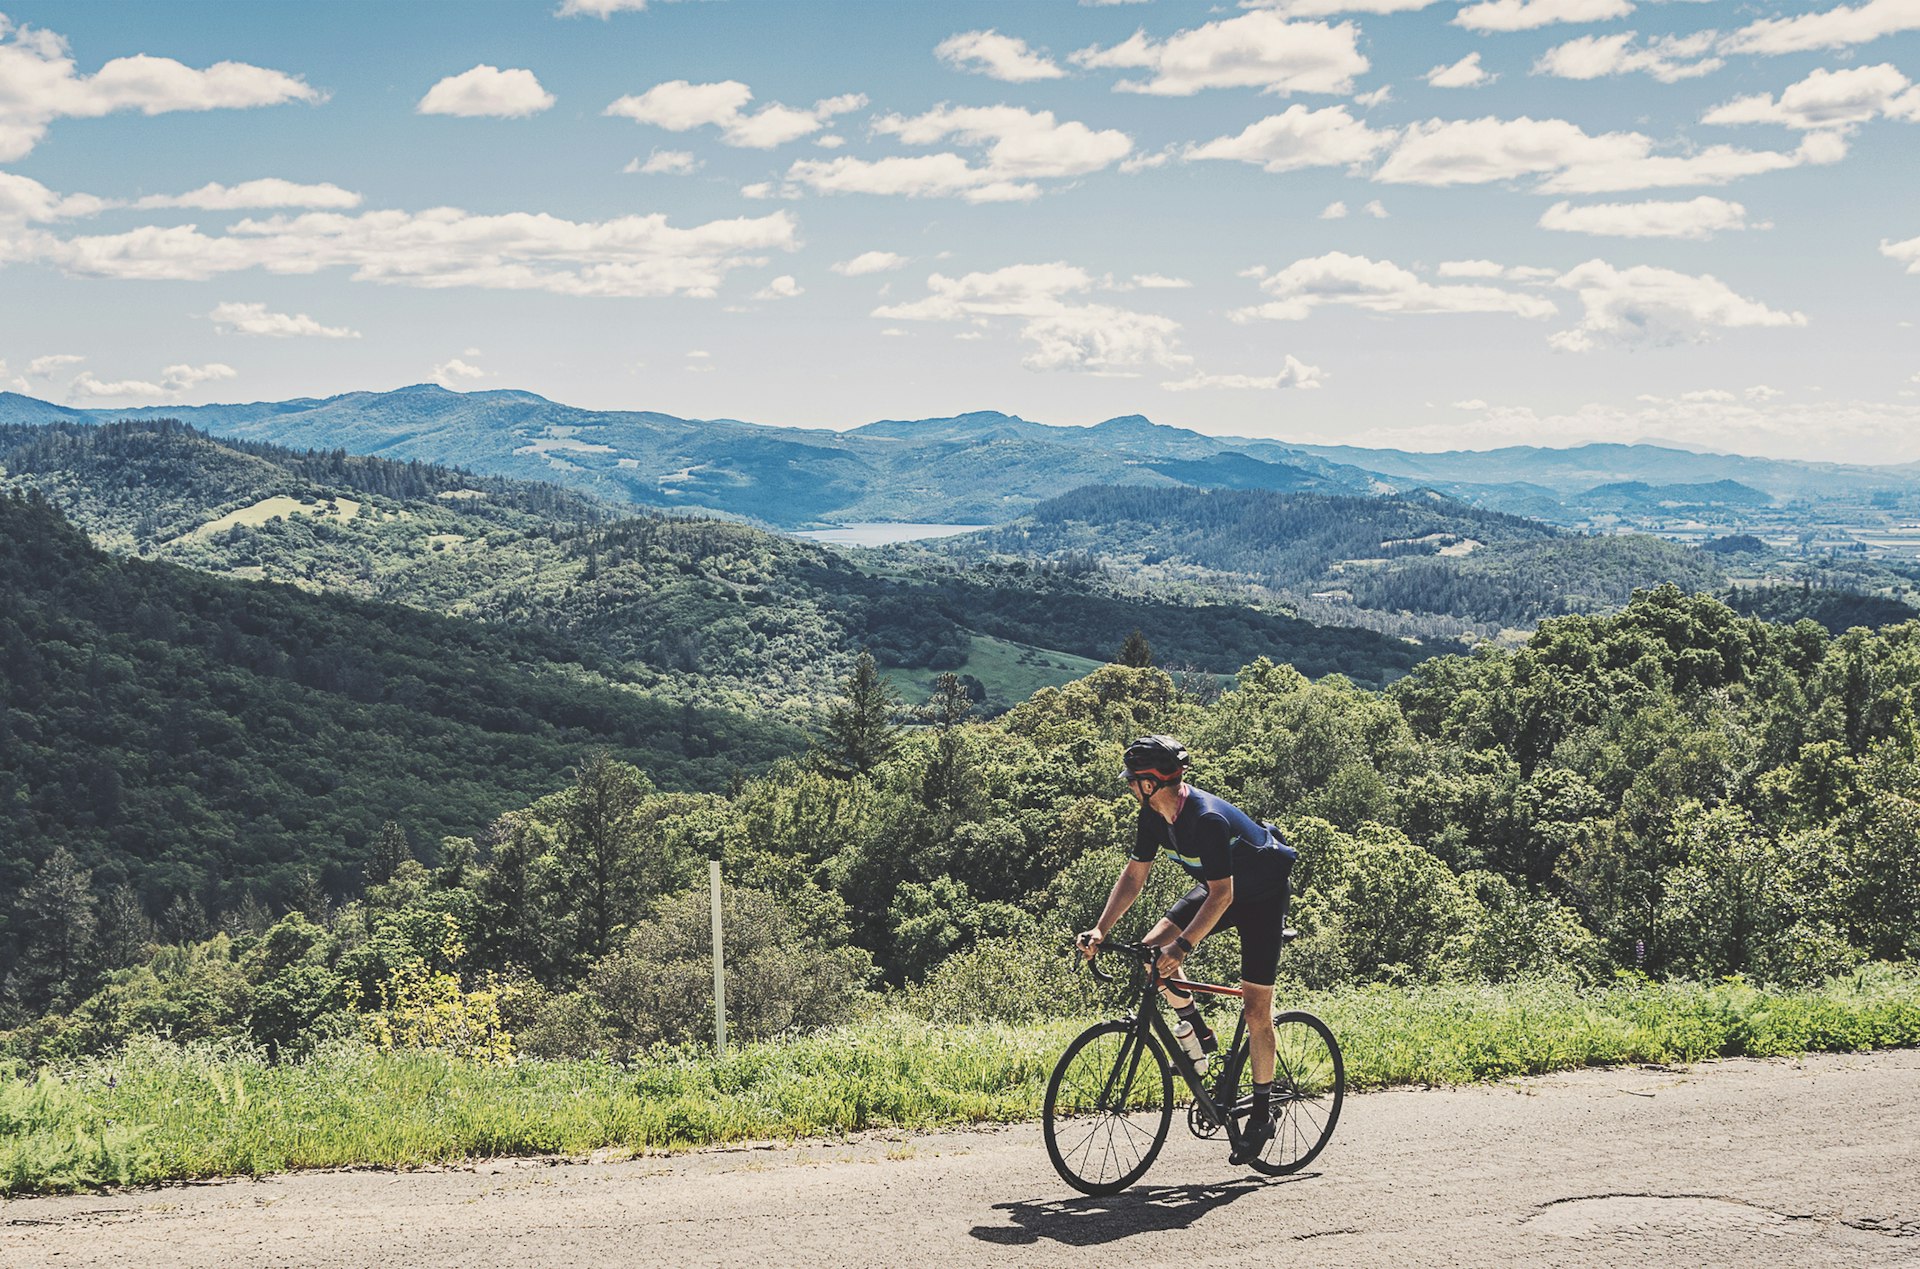 A man bicycling on a hilly road in Napa, California, USA